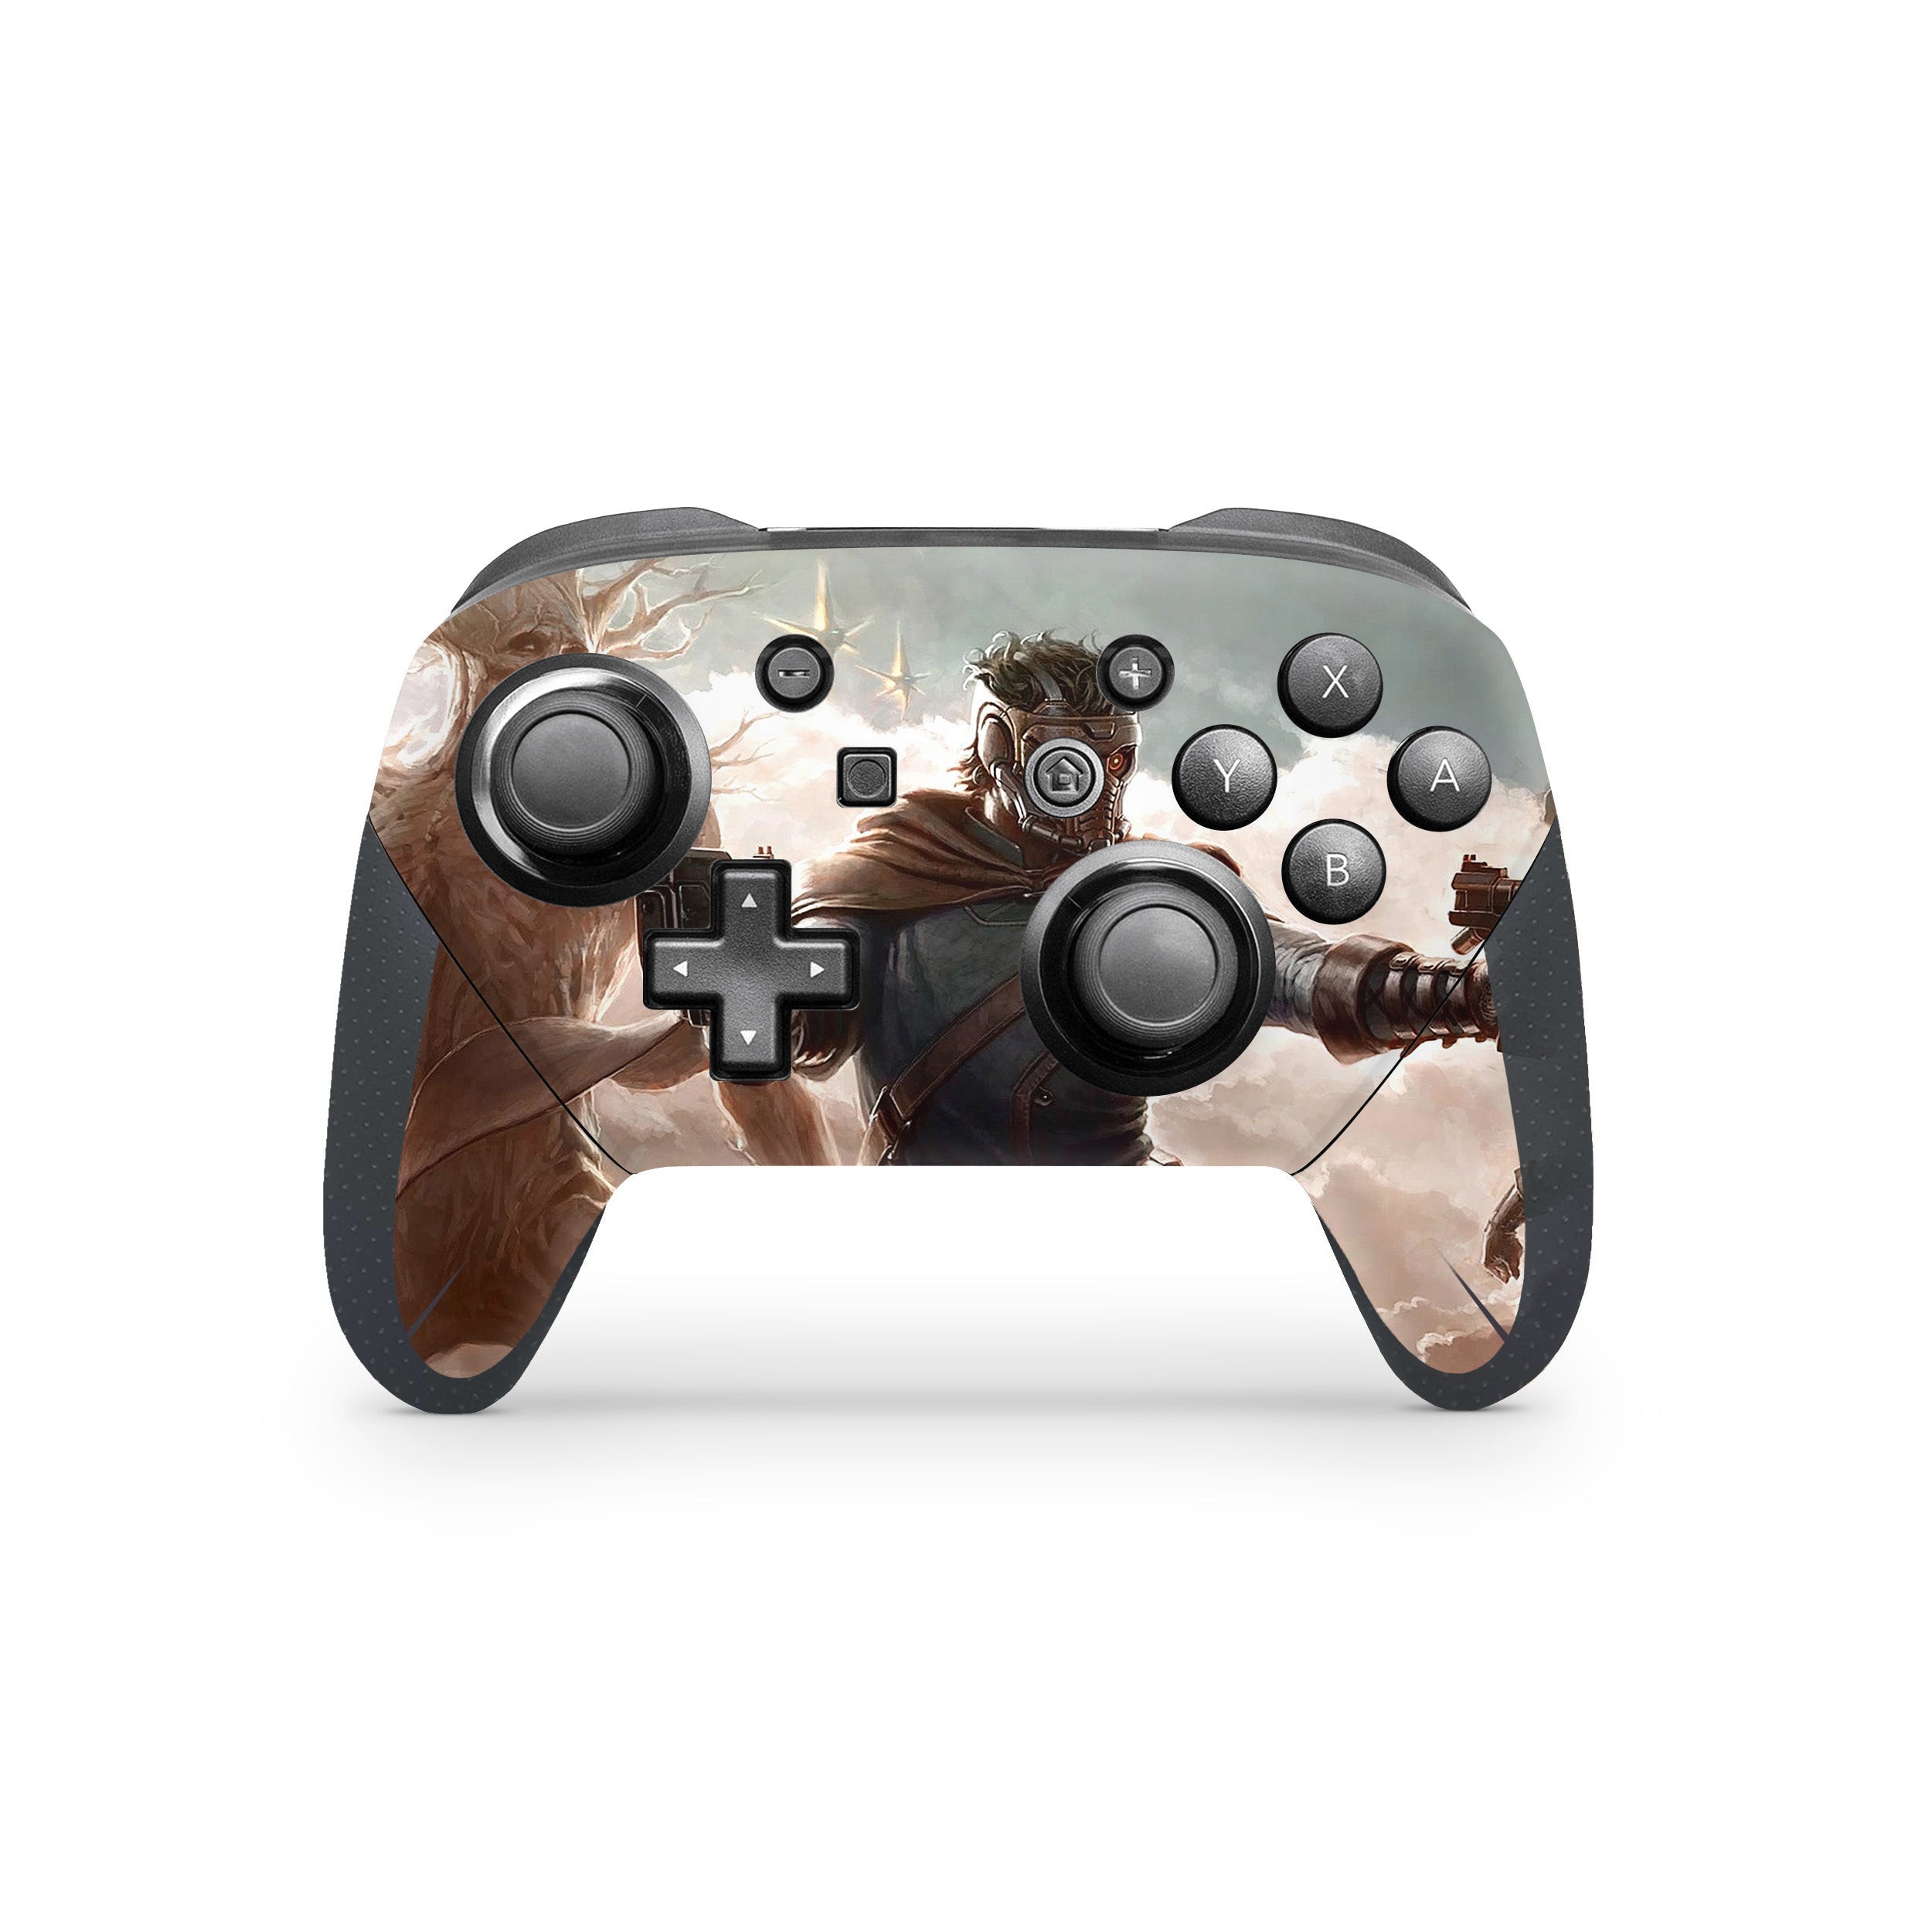 A video game skin featuring a Marvel Guardians of the Galaxy design for the Switch Pro Controller.